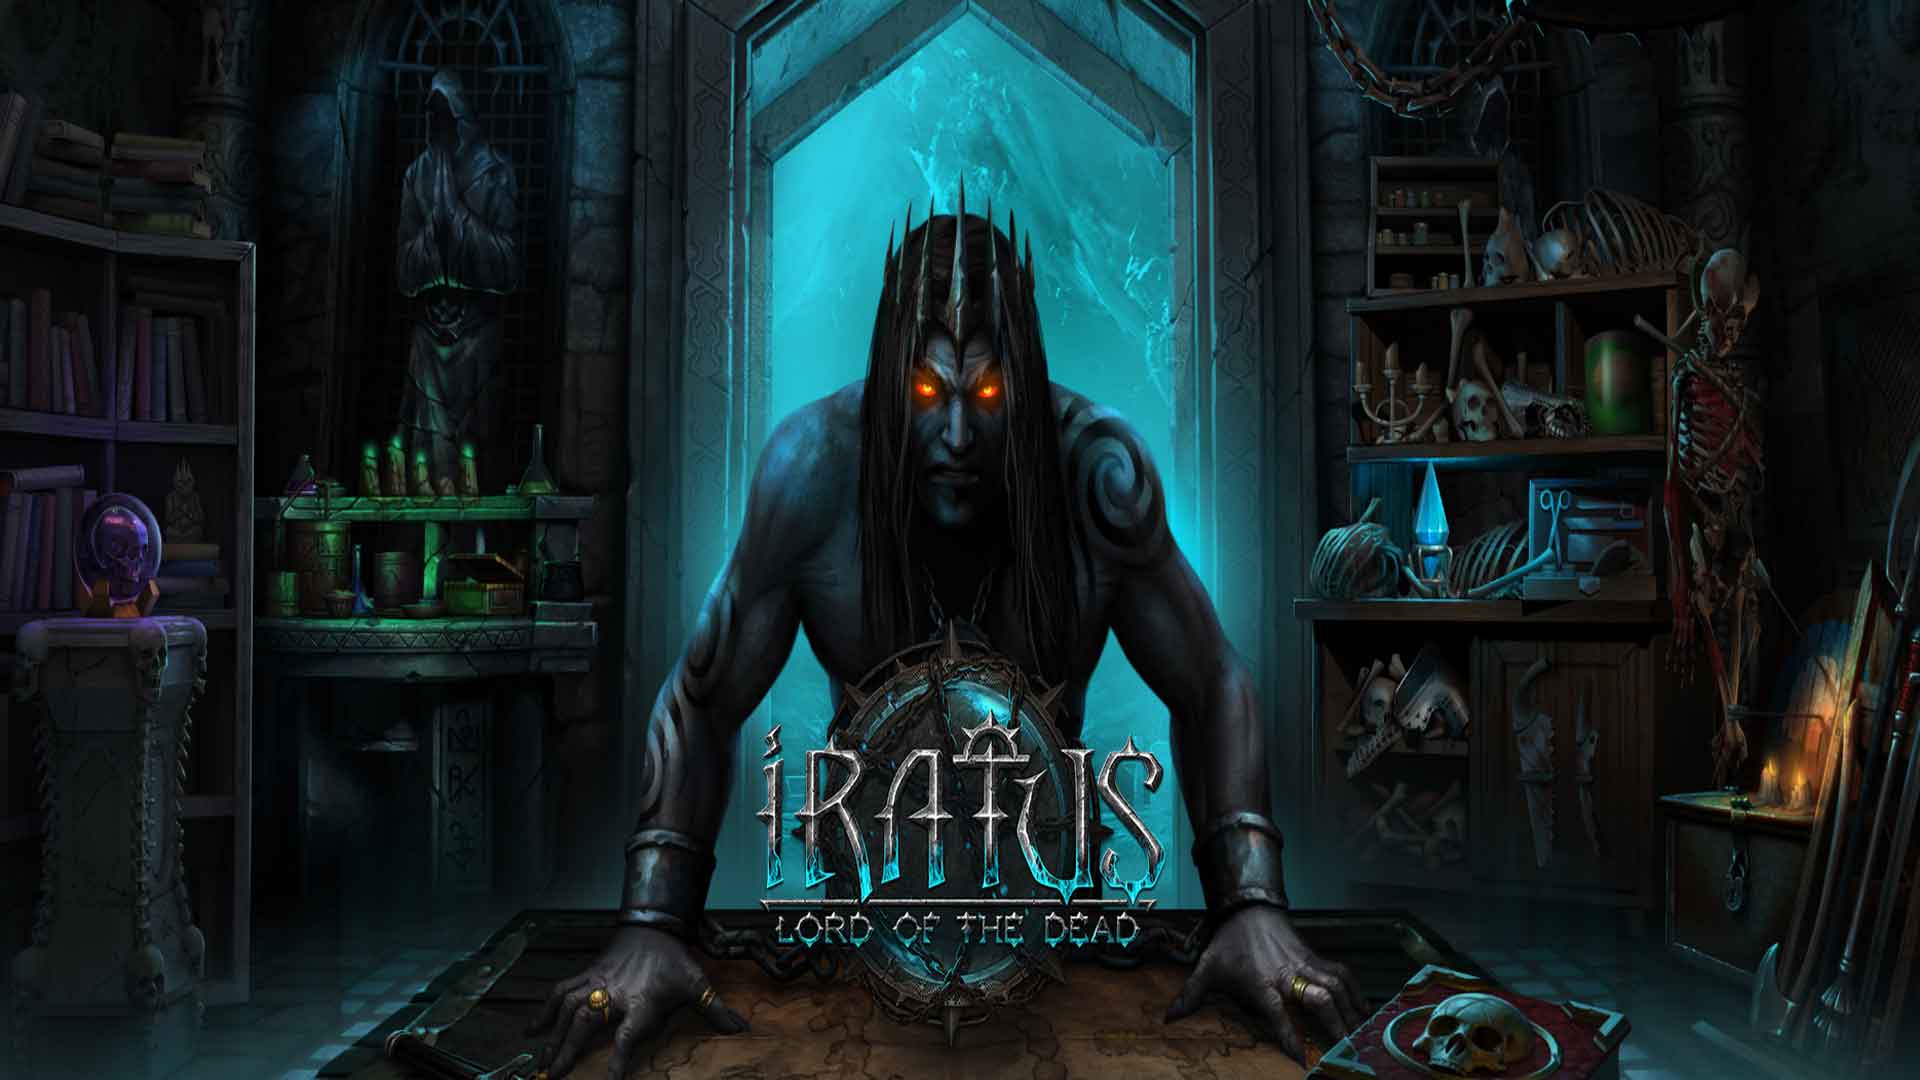 Iratus: Lord of the Dead for ios instal